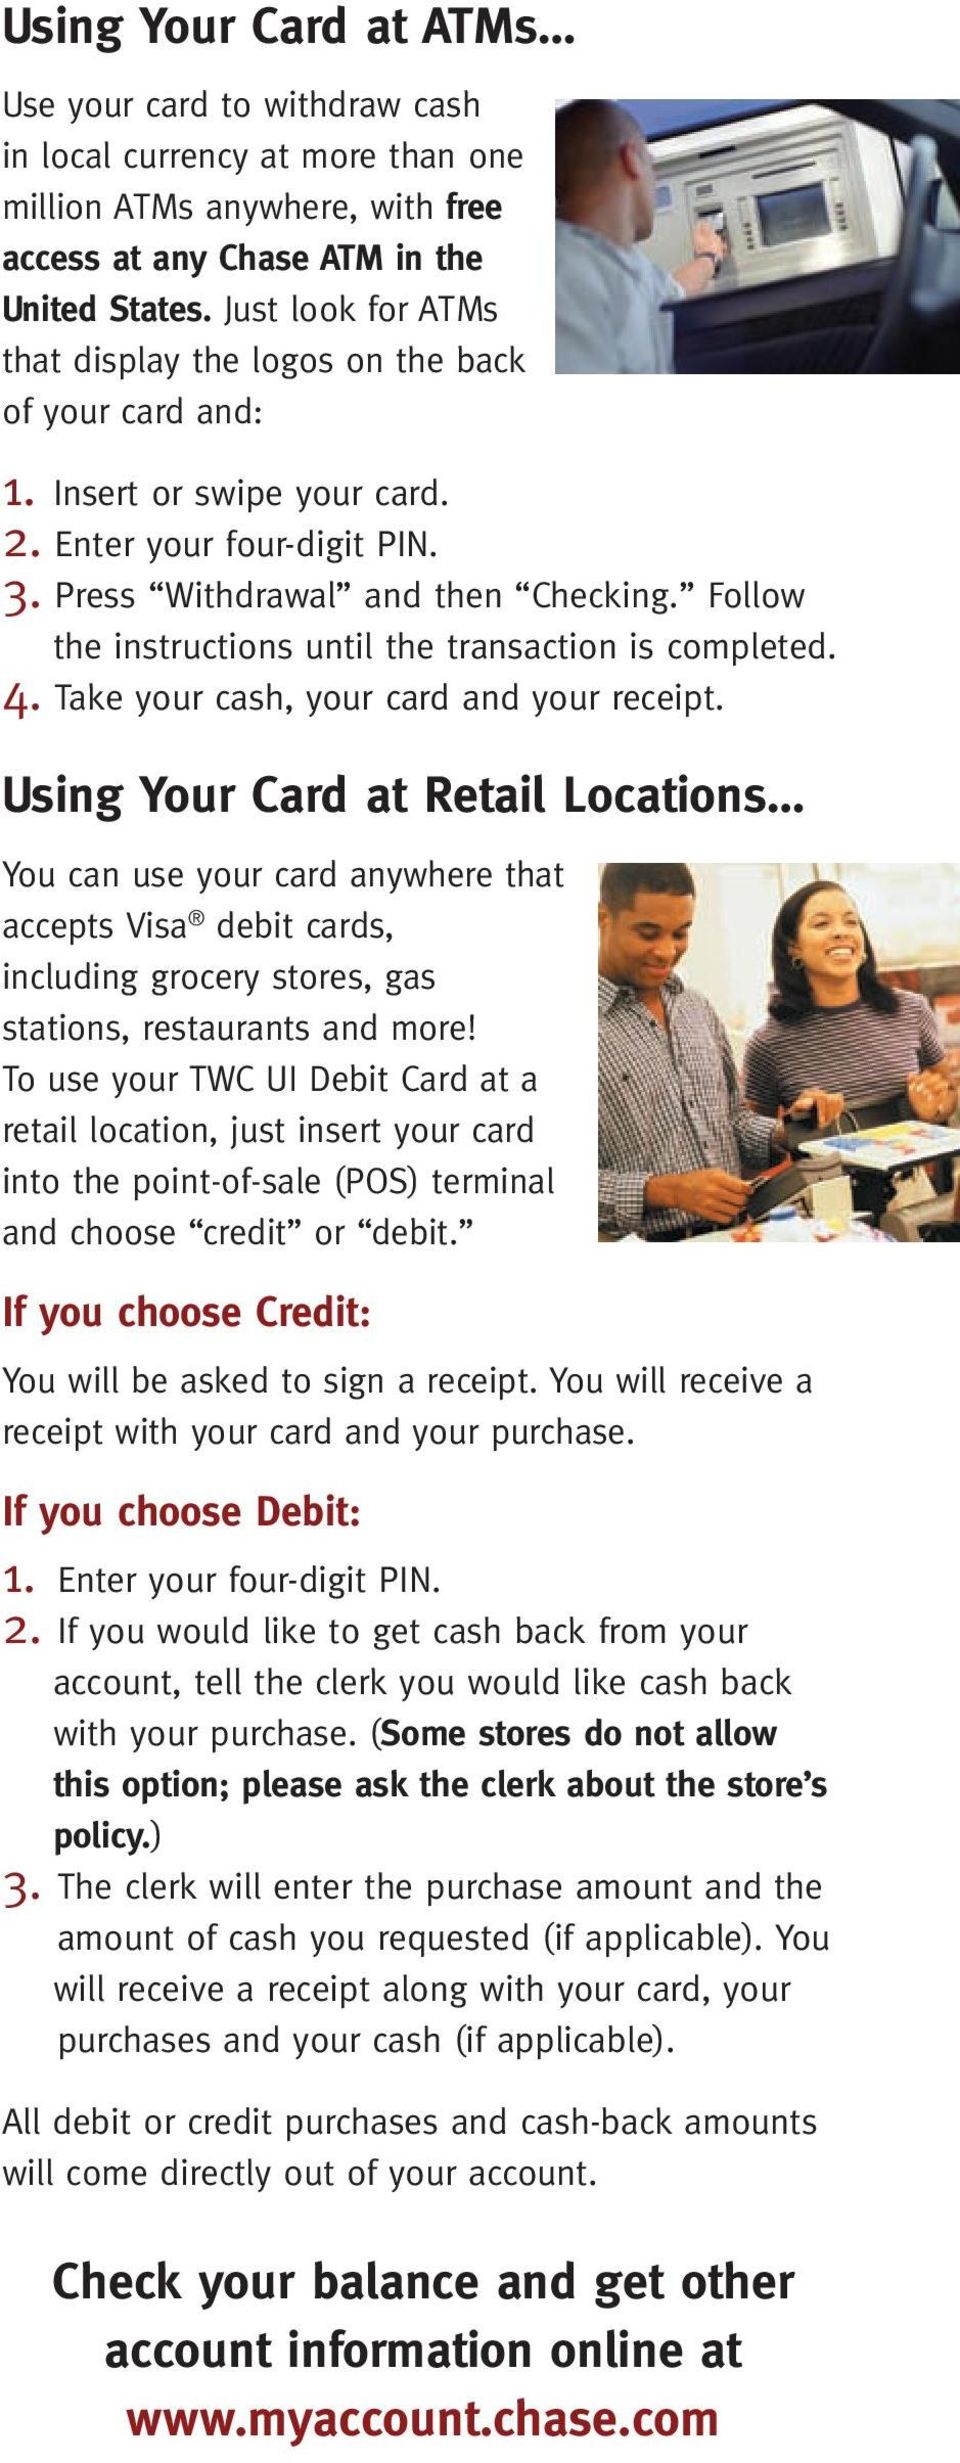 Follow the instructions until the transaction is completed. 4. Take your cash, your card and your receipt.